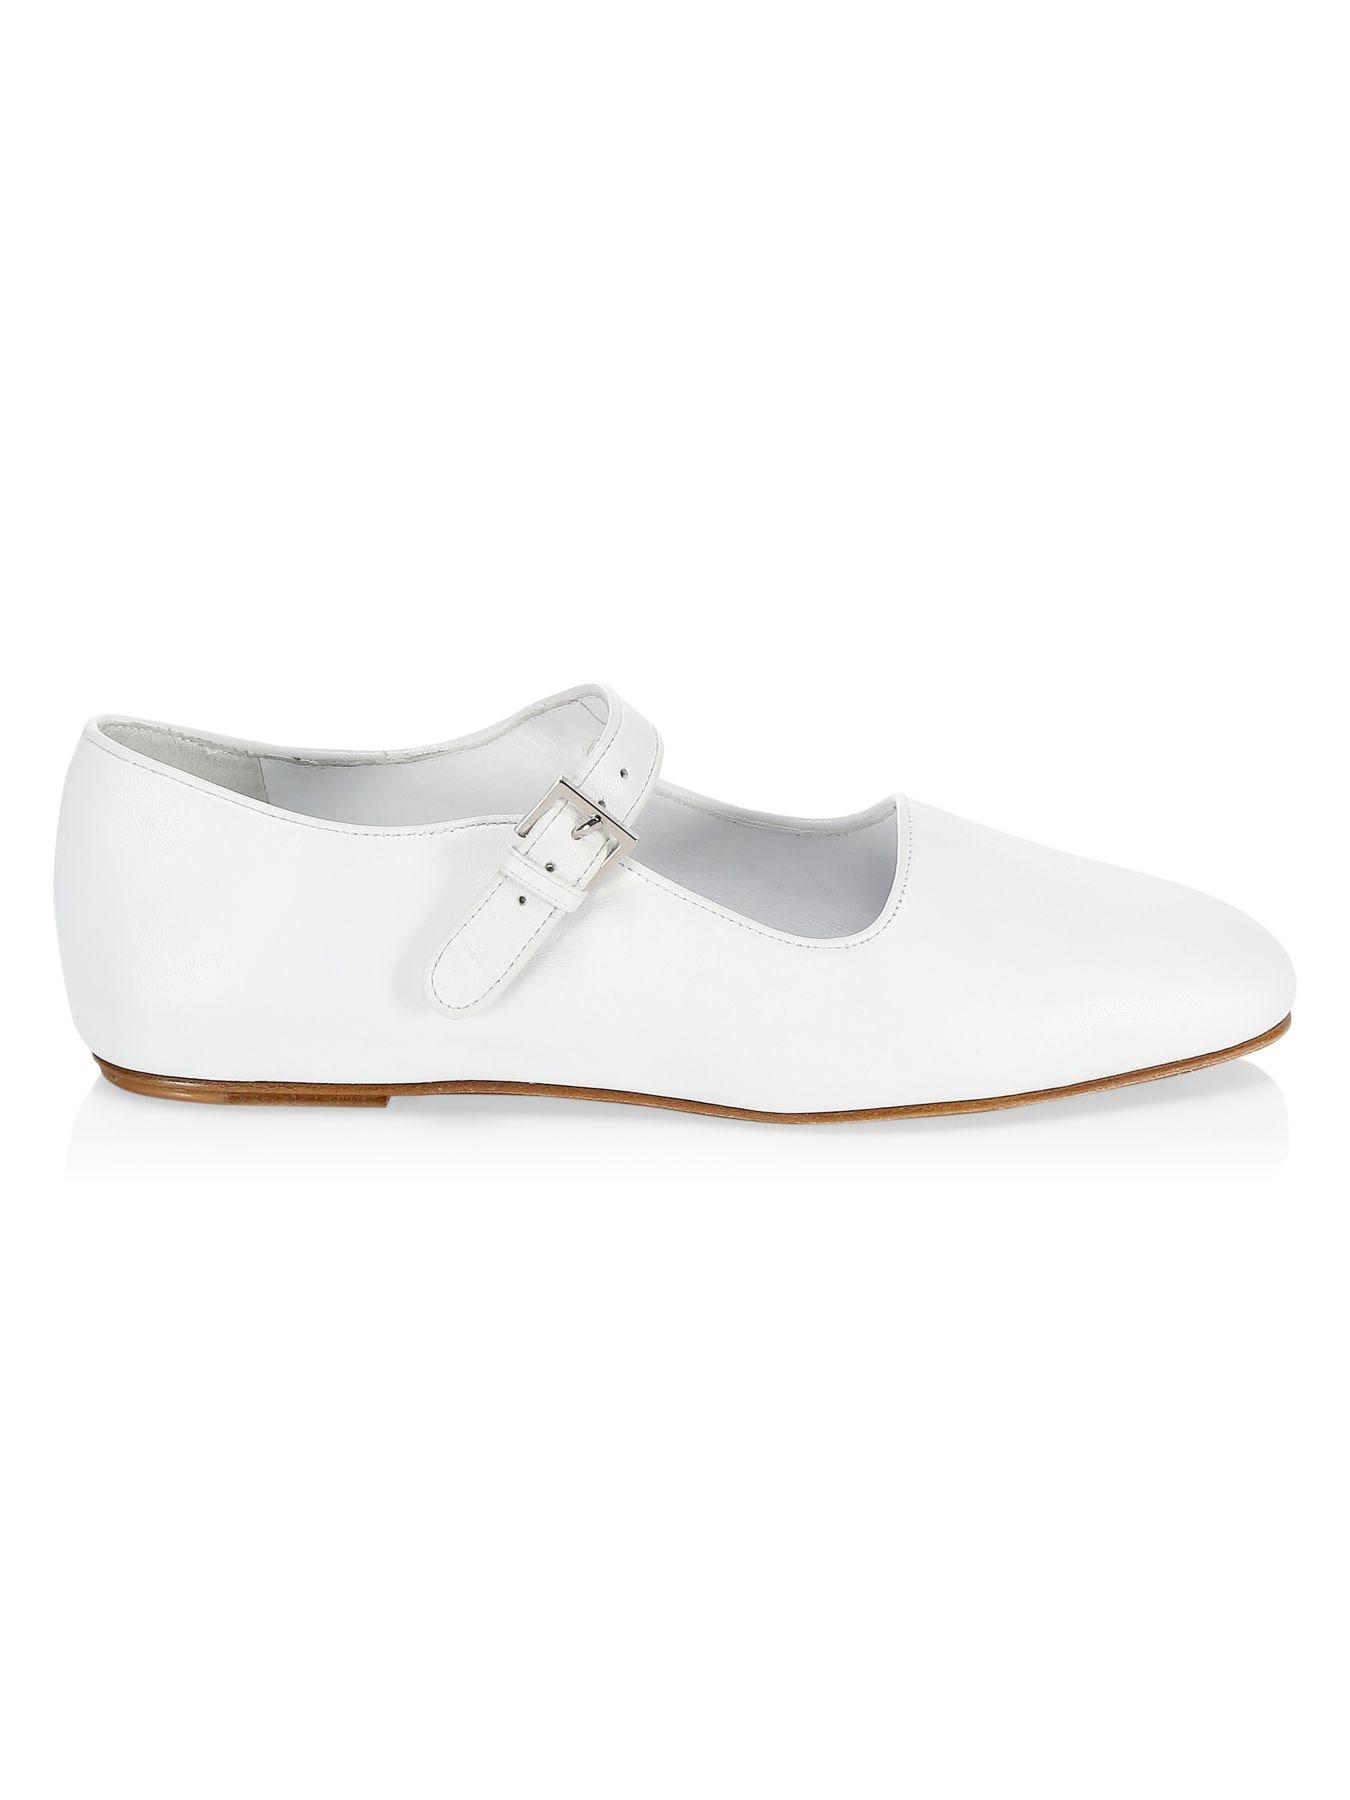 The Row Ava Square-toe Leather Mary-jane Flats in White - Save 30% - Lyst